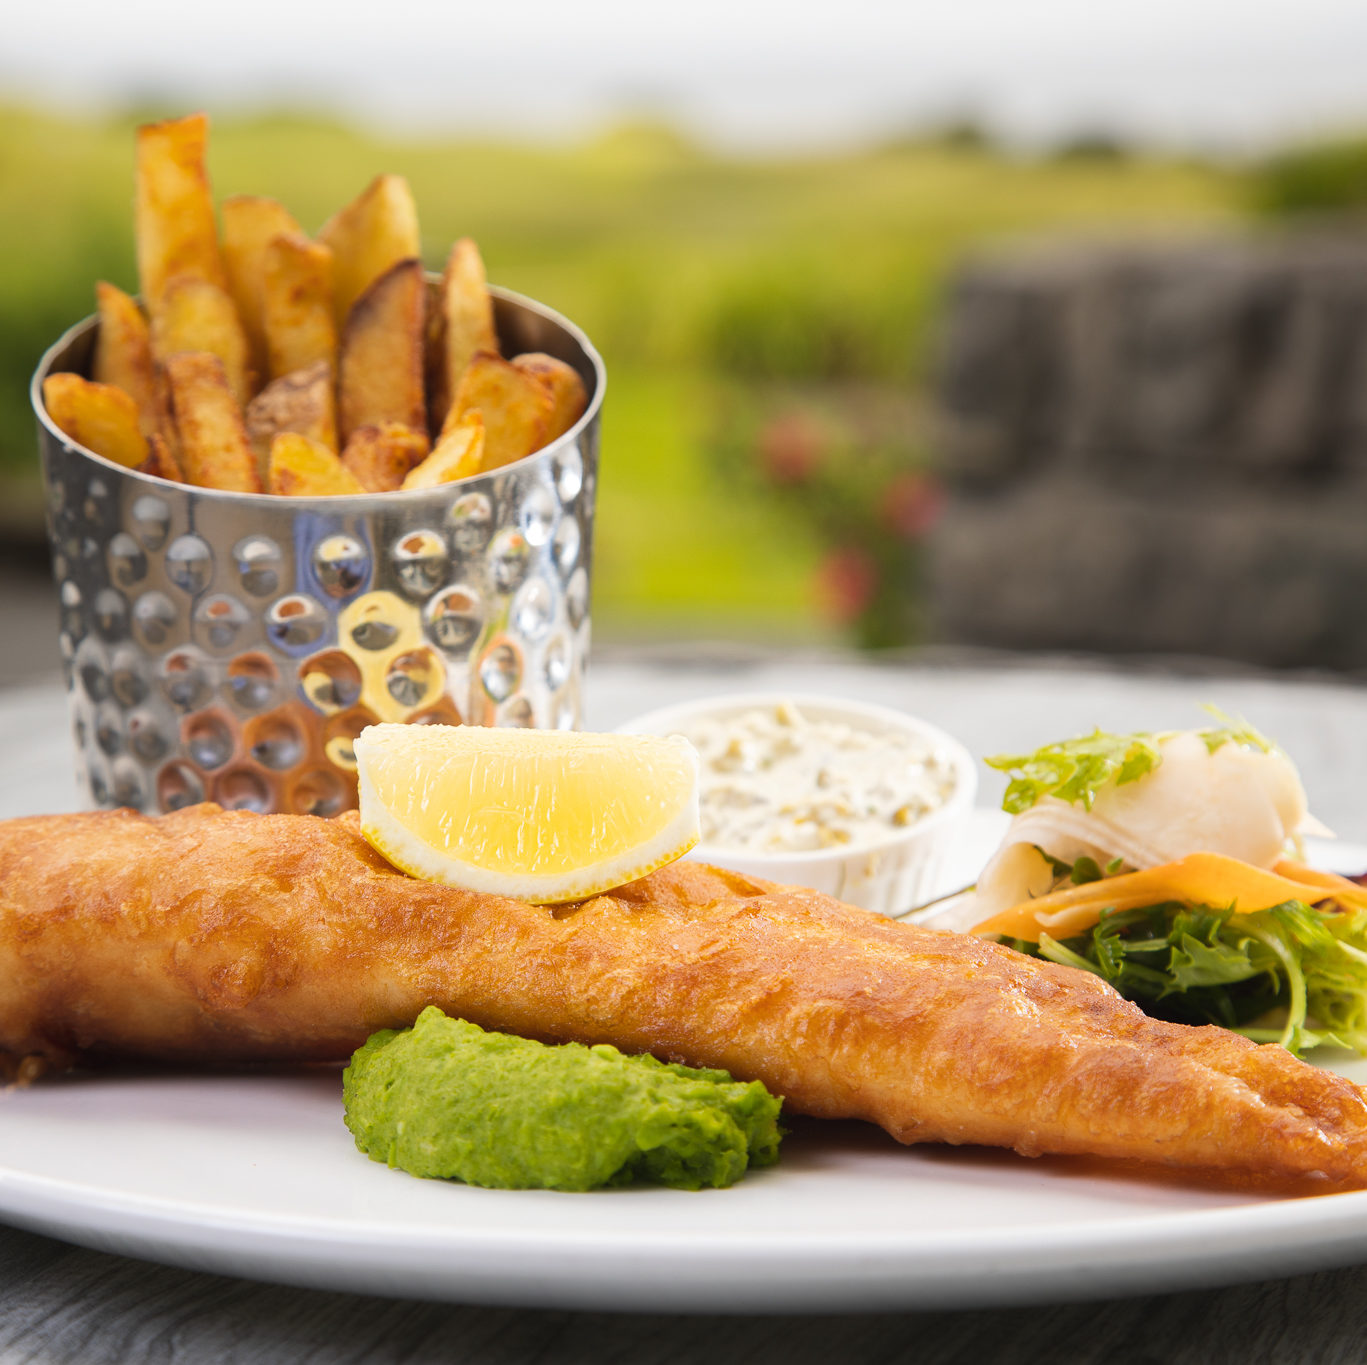 battered fish with lemon wedge, side salad and chips